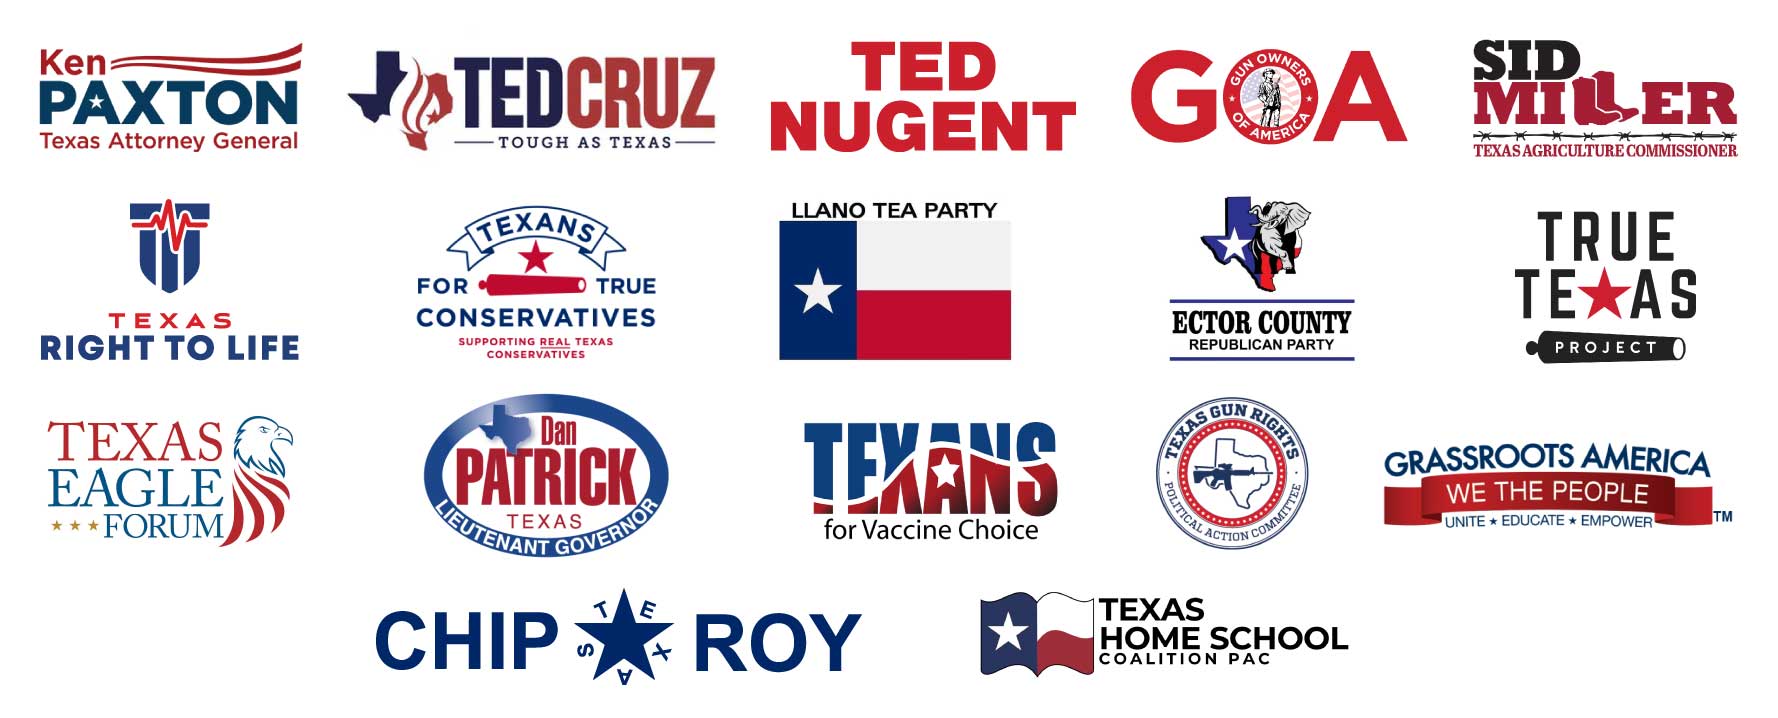 endorsed by ken paxton, grassroots america, gun owners of america, llano tea party, ector county republican party, and texans for true conservatives